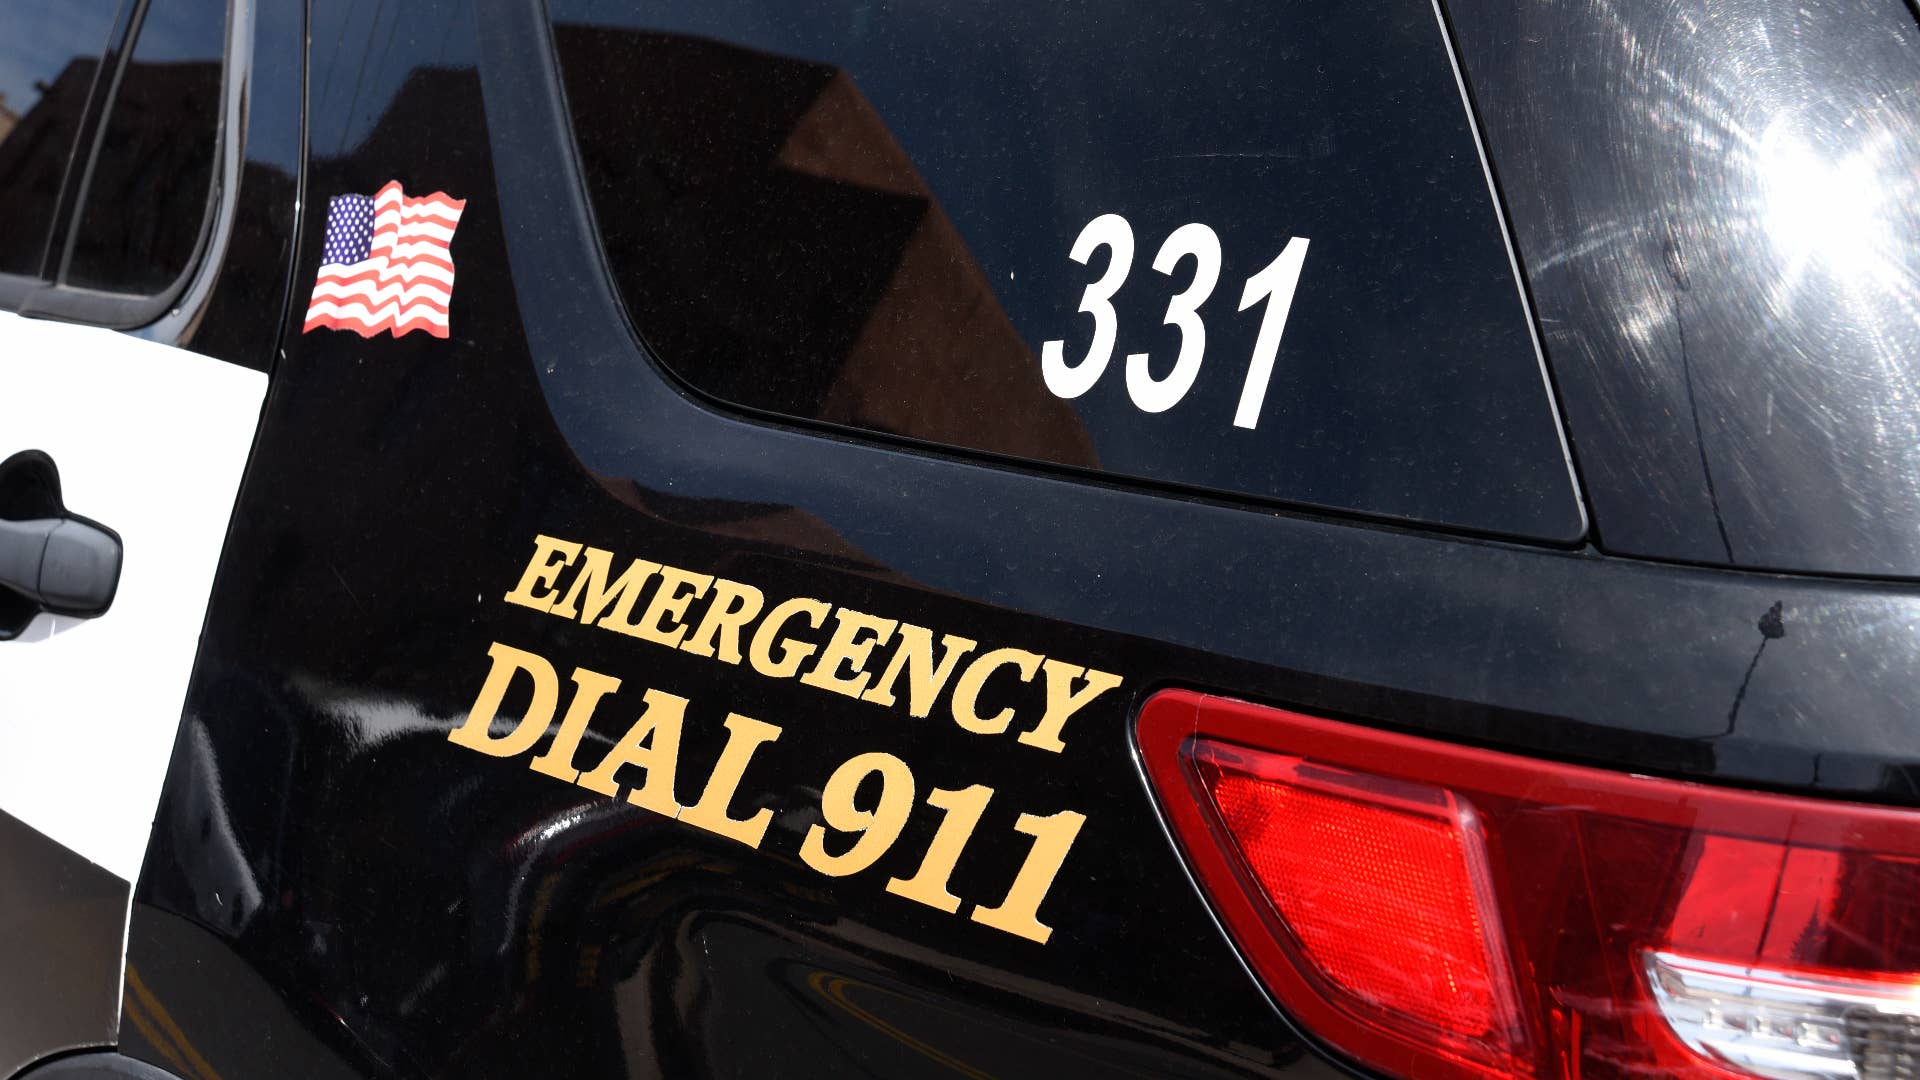 A police car with 'Emergency Dial 911' on its side parked in Santa Fe, New Mexico.